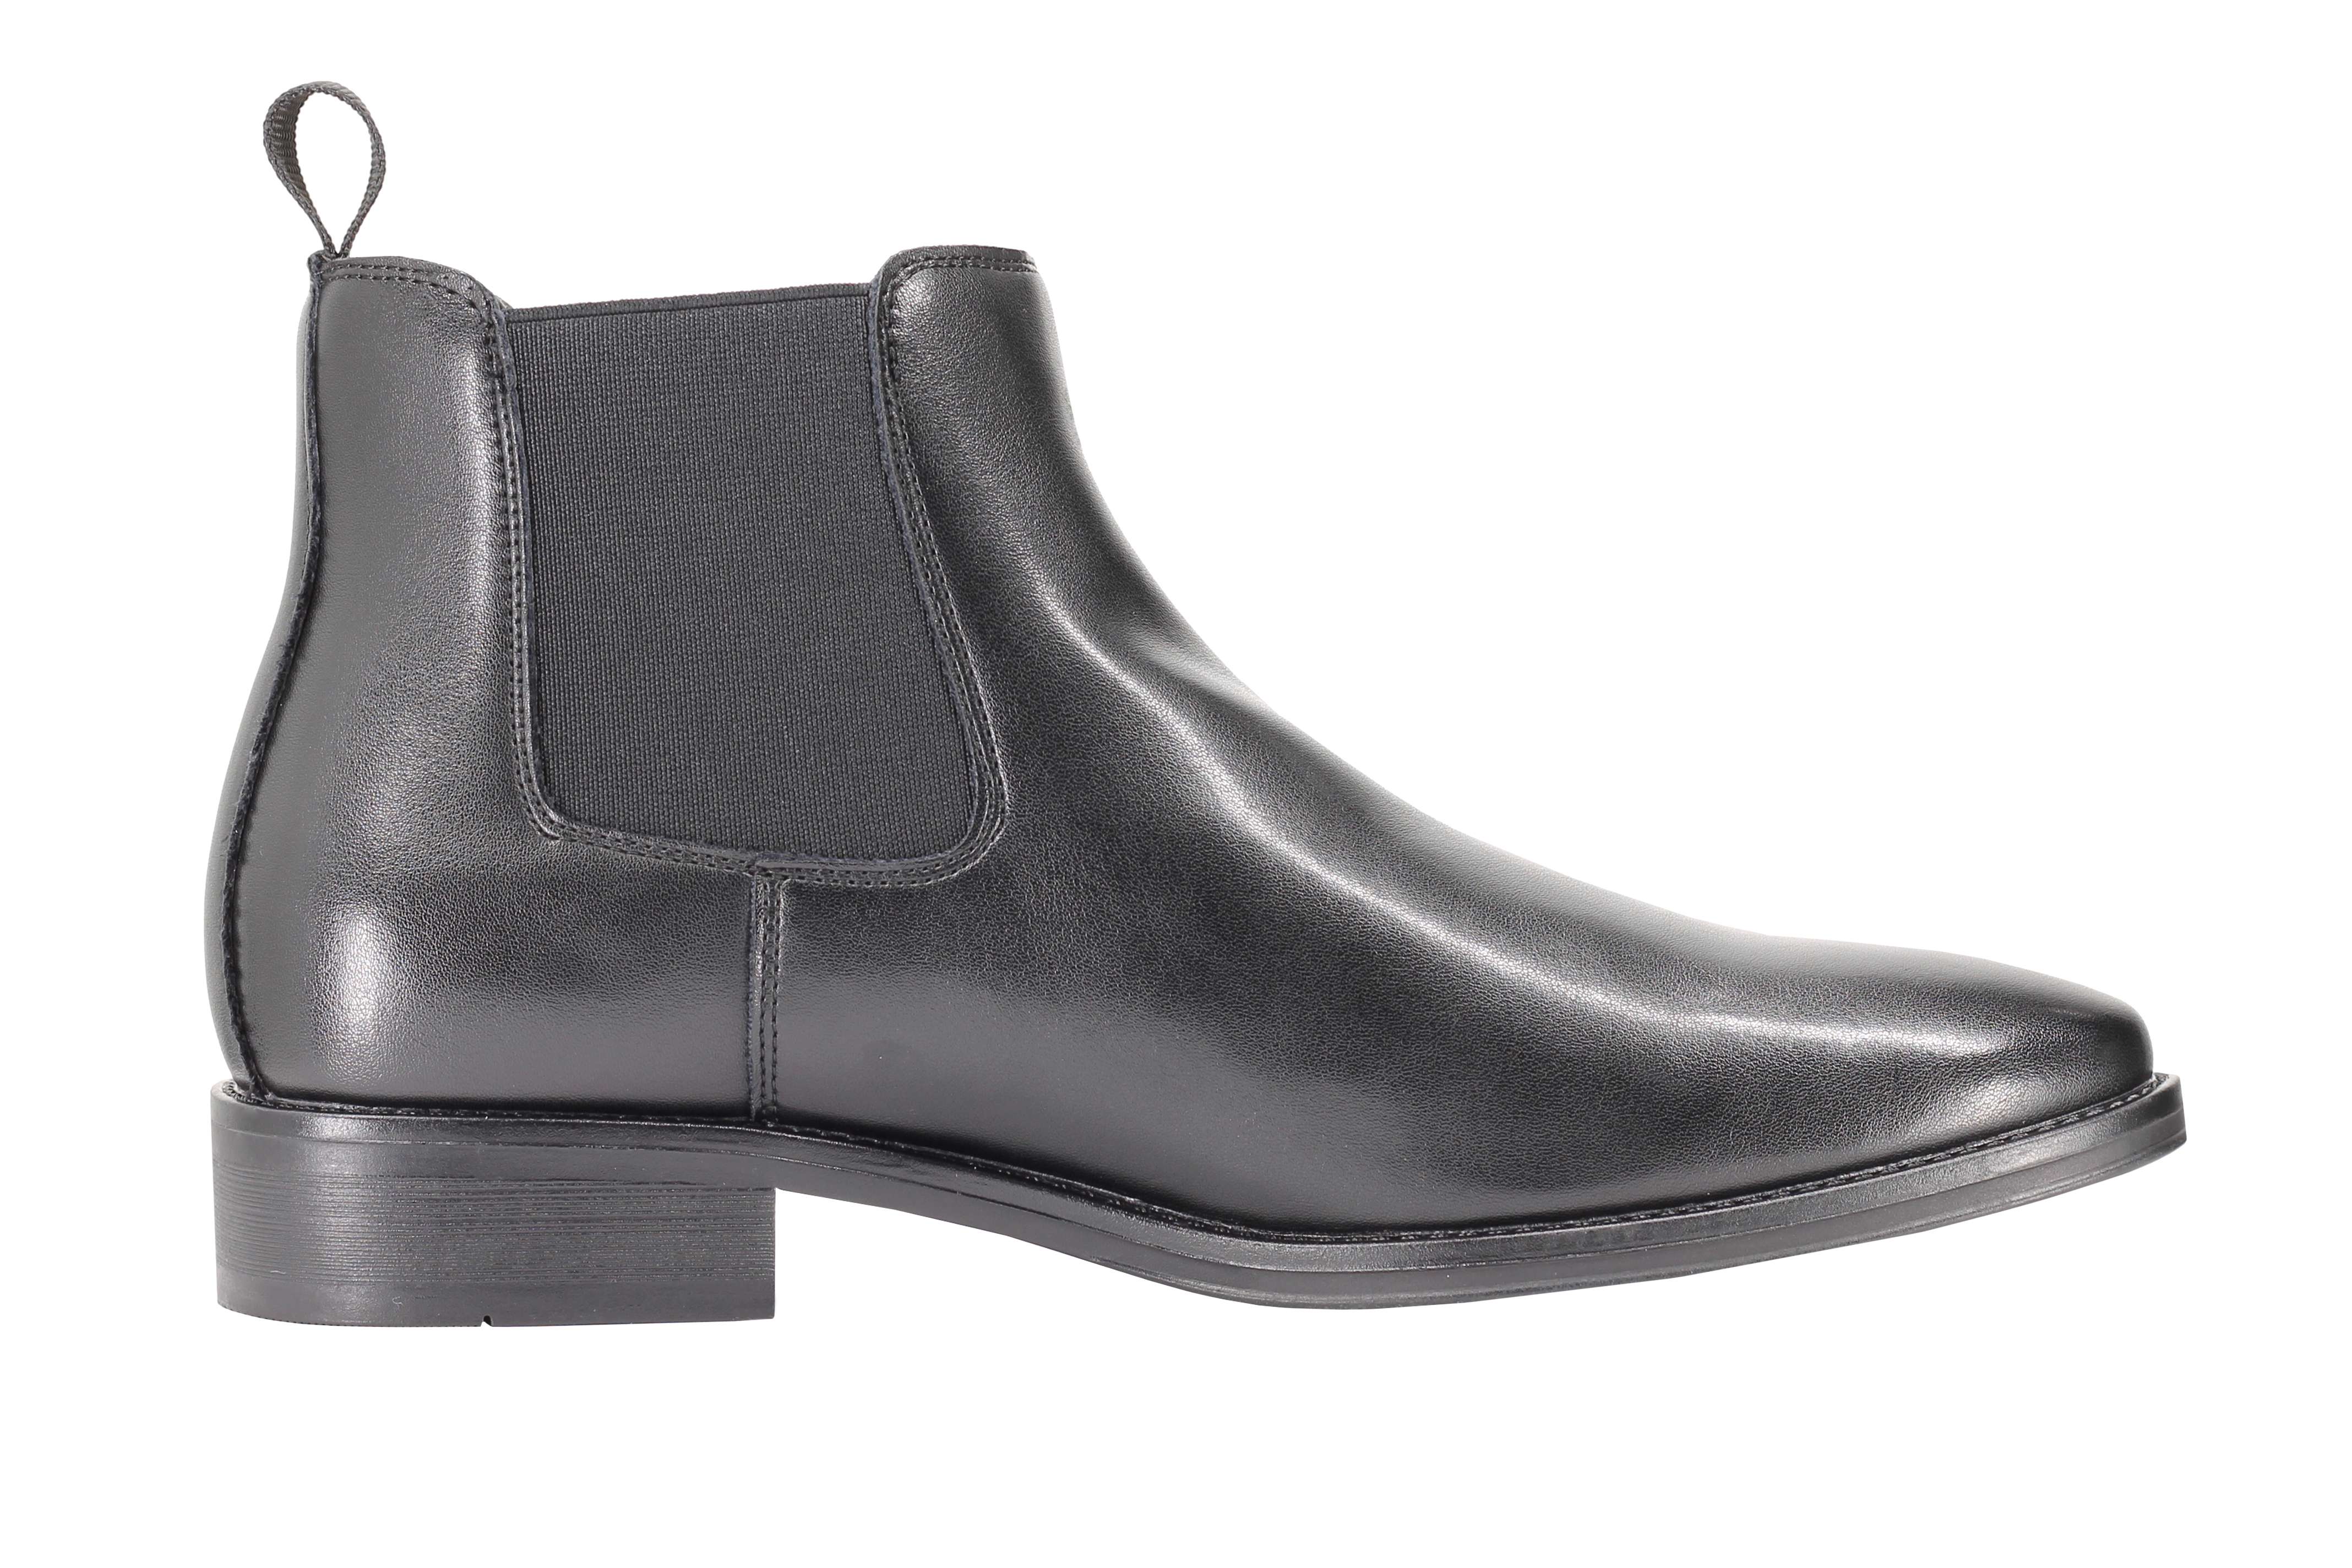 Chelsea Faux Leather Ankle Boots in black and brown